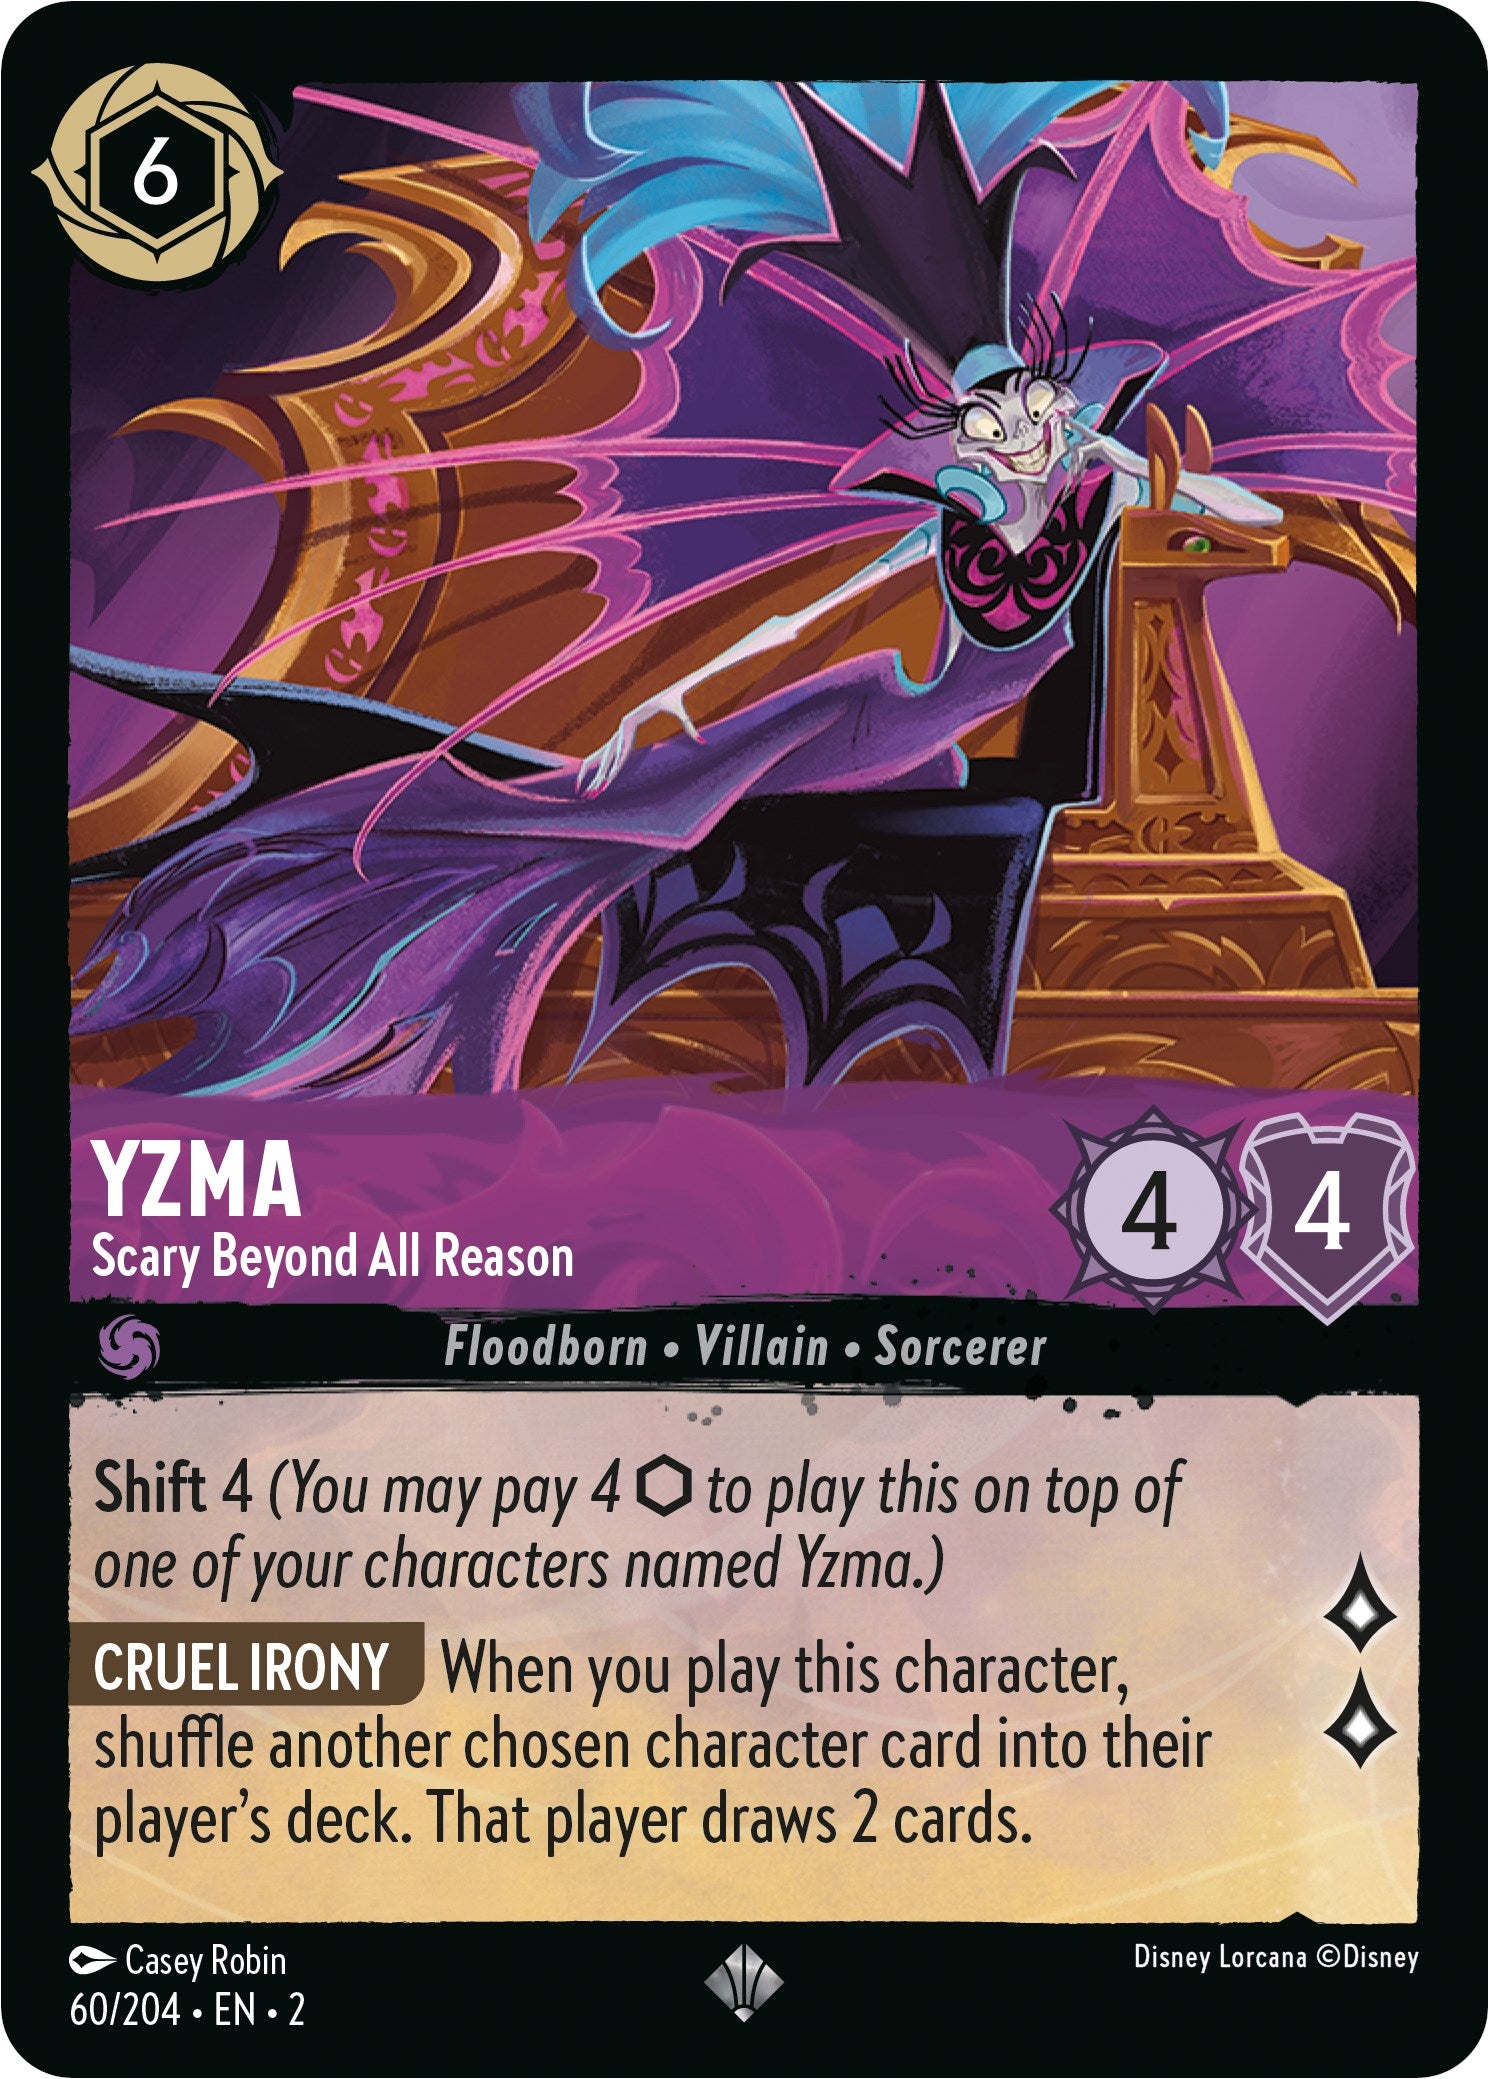 Yzma - Scary Beyond All Reason 60/204 (Rise of the Floodborn)